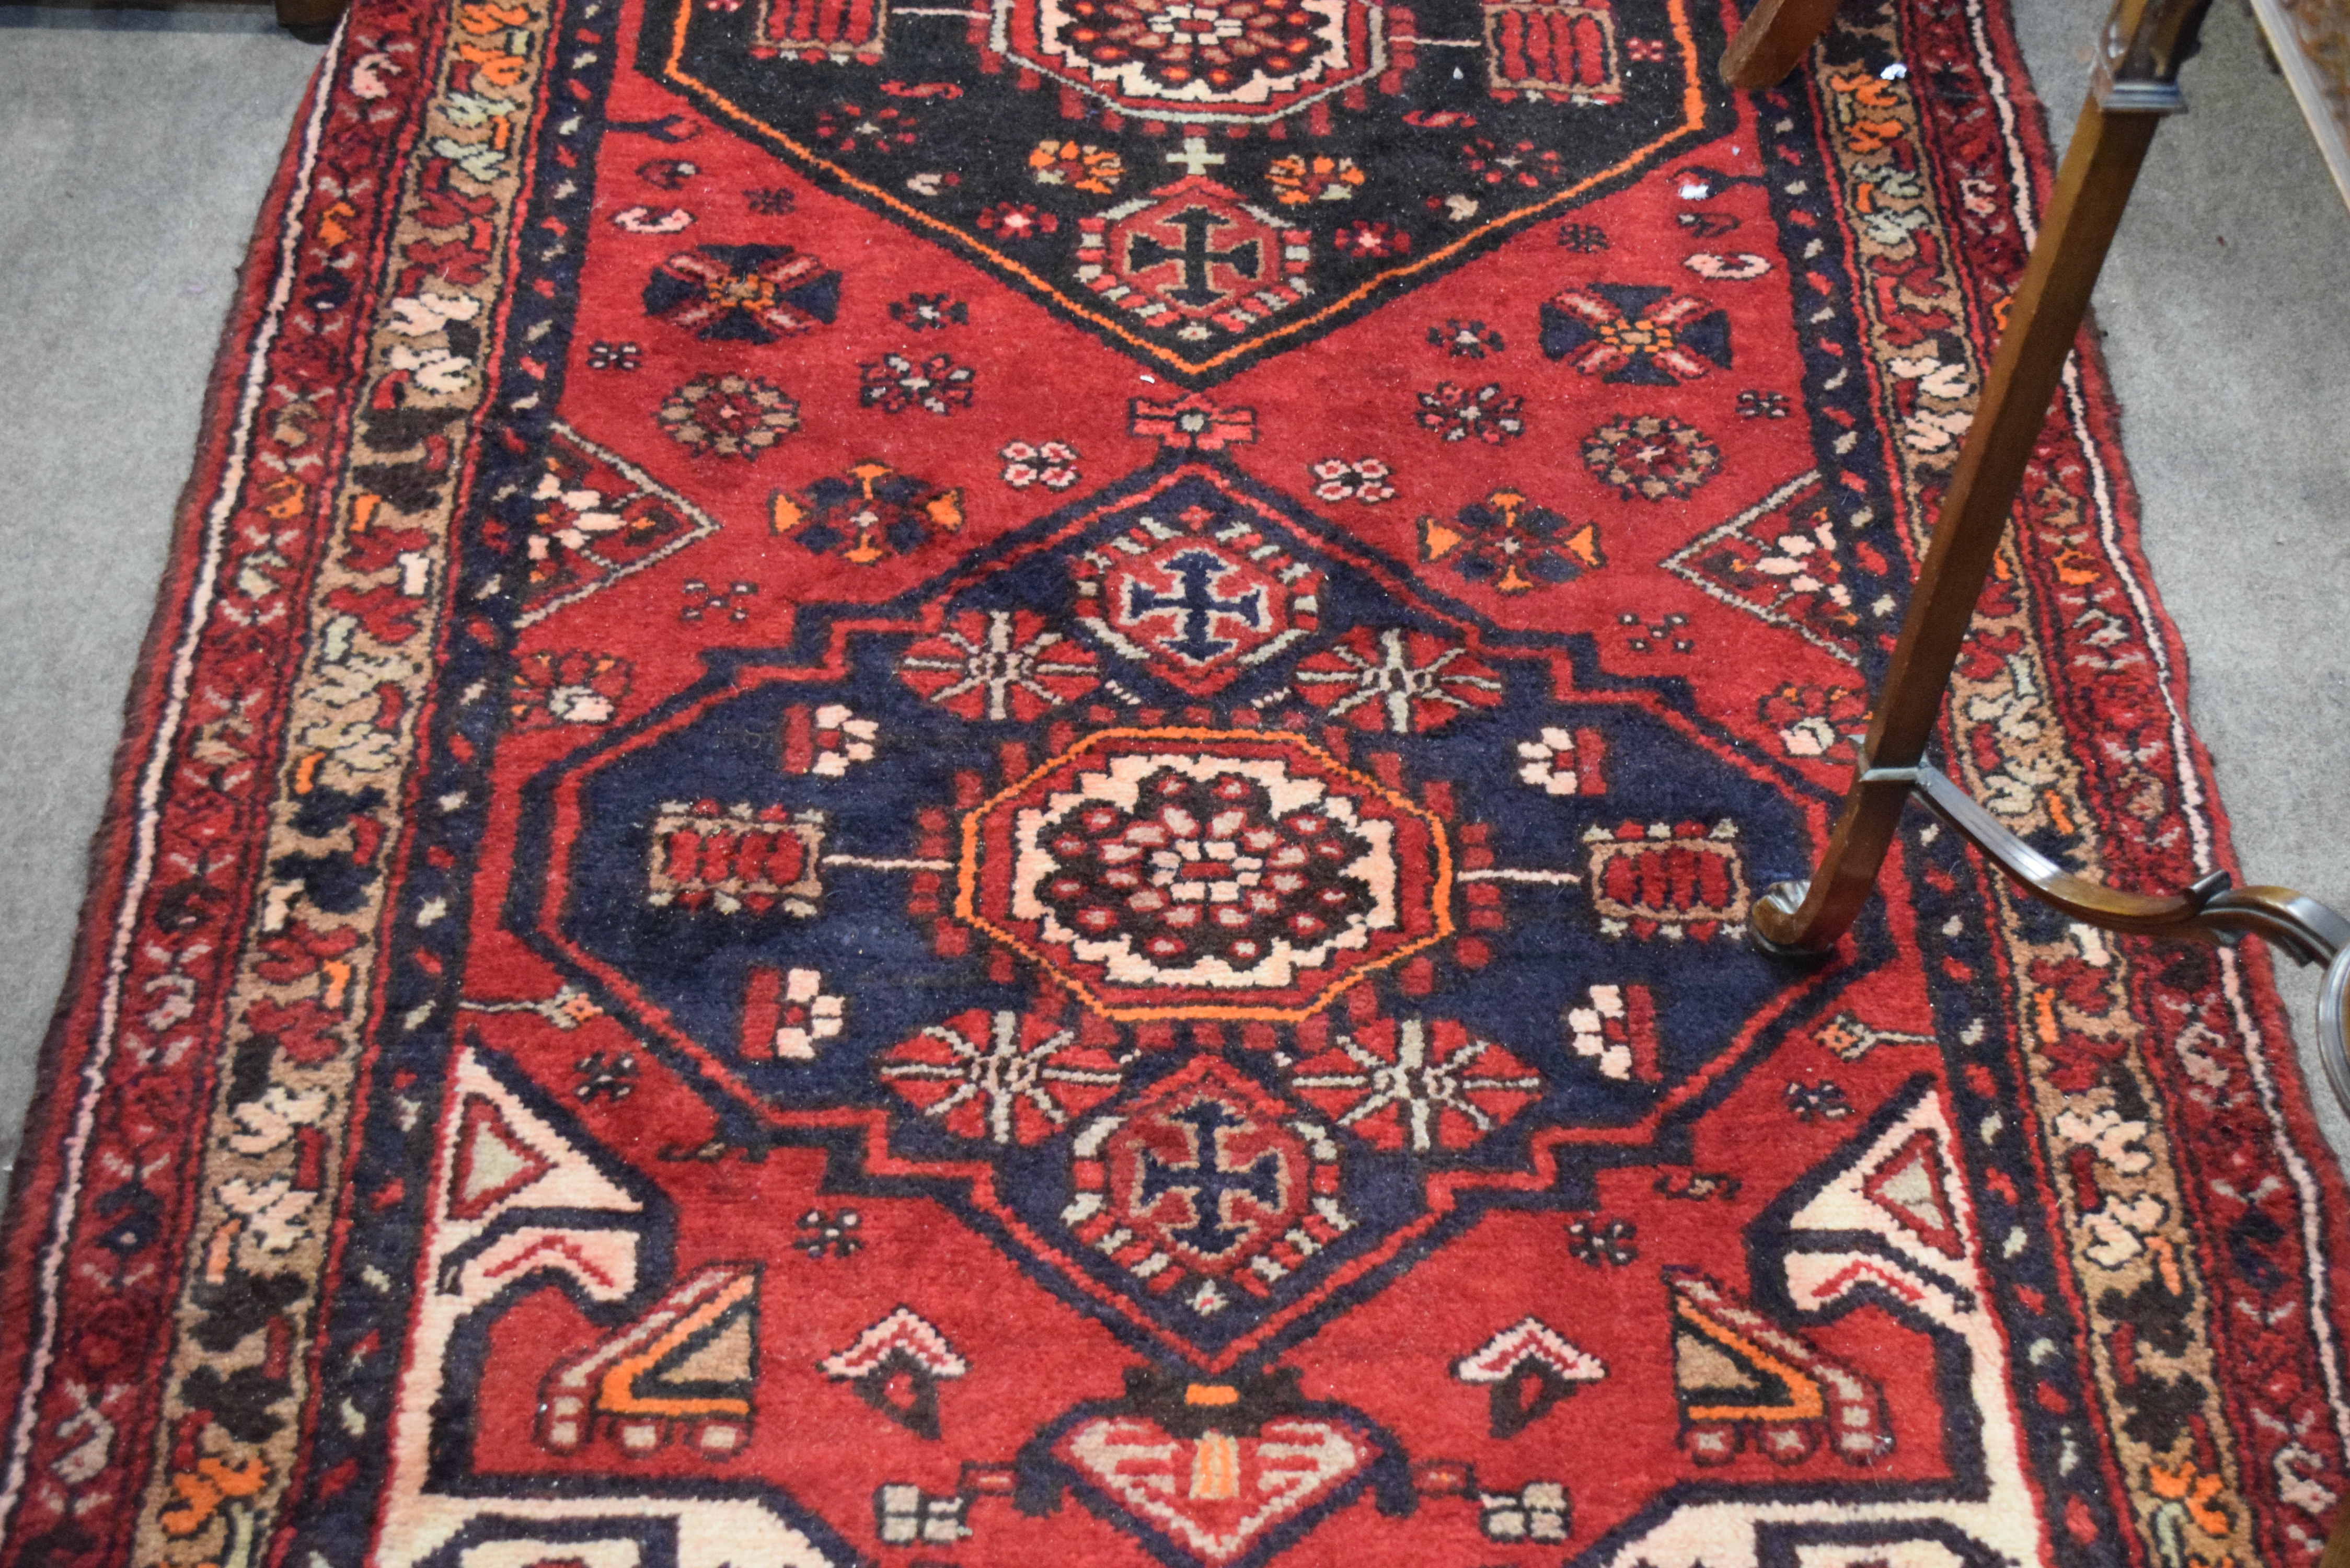 Rich red ground full pile Persian Hamadan Runner 286cm x 110cm approximately - Image 5 of 6